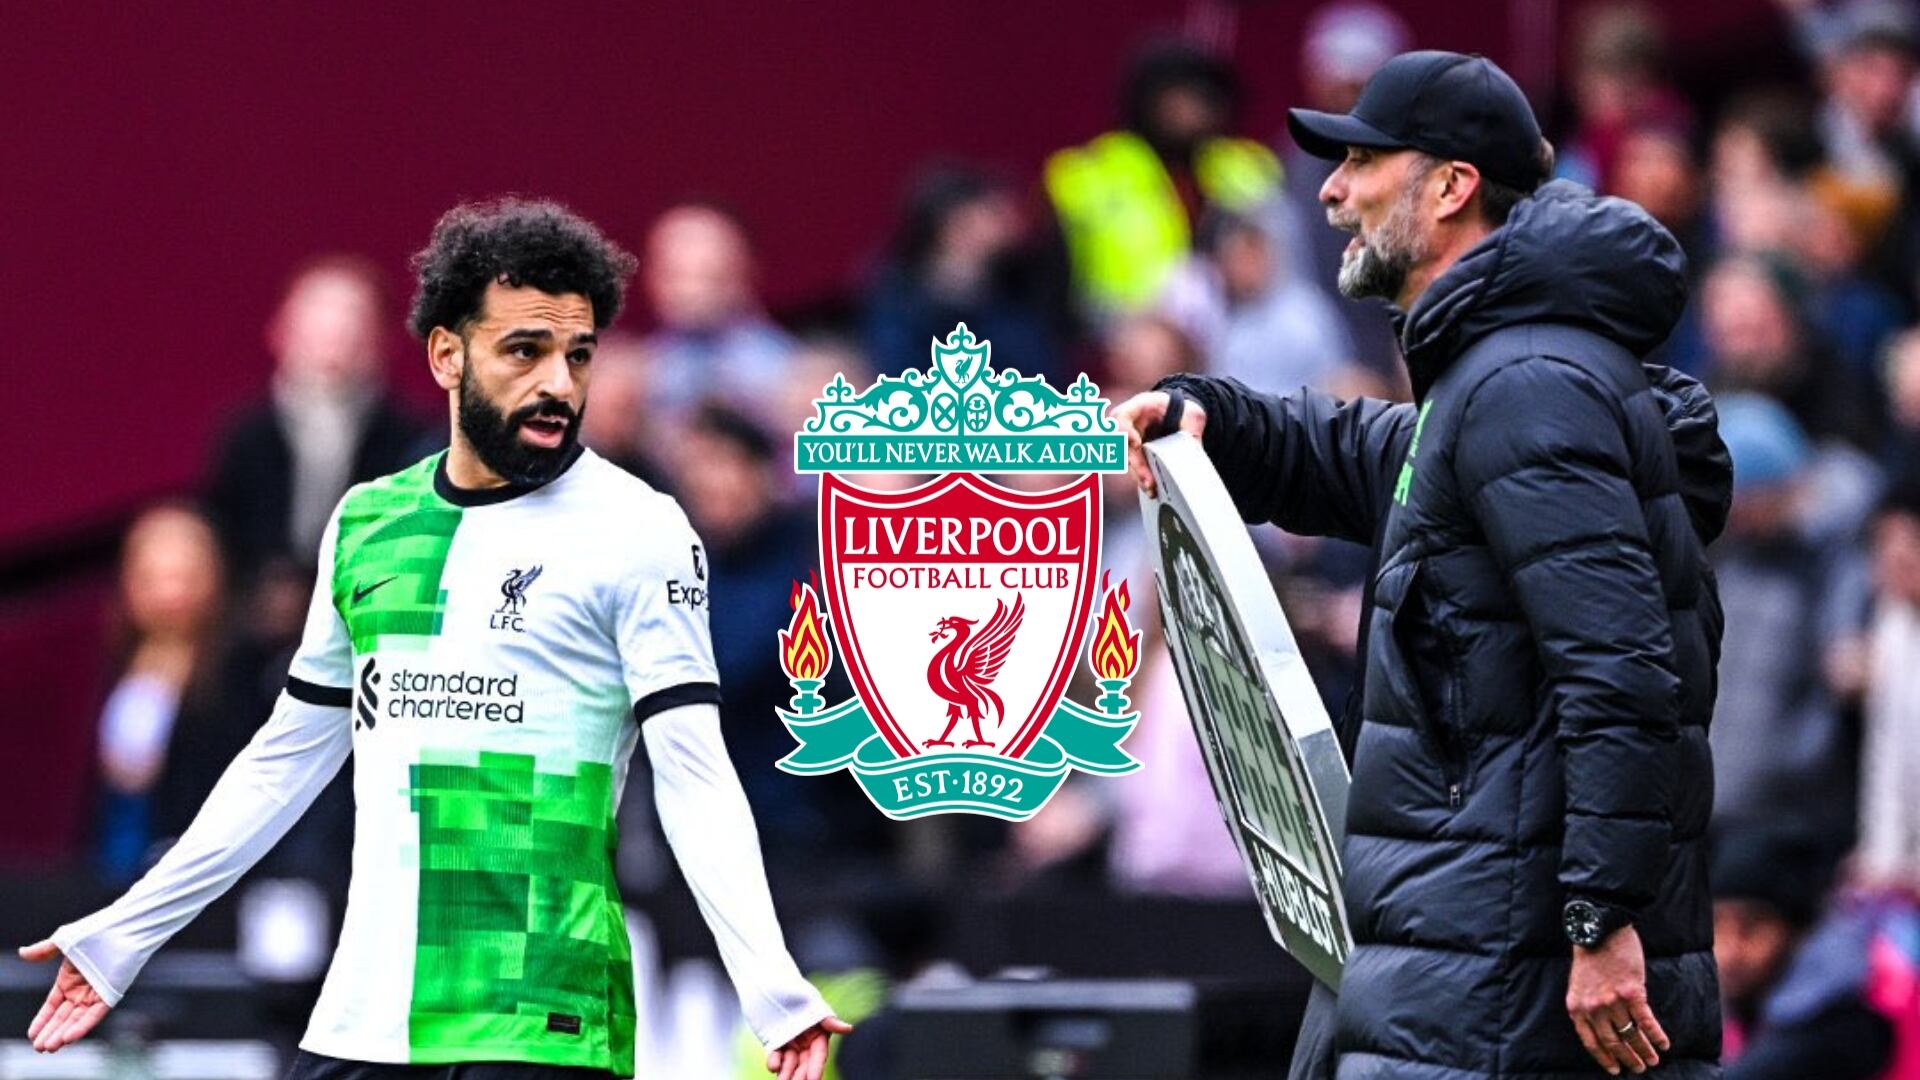 (VIDEO) The worst farewell with Liverpool, Salah left in anger and this is what he did against Klopp